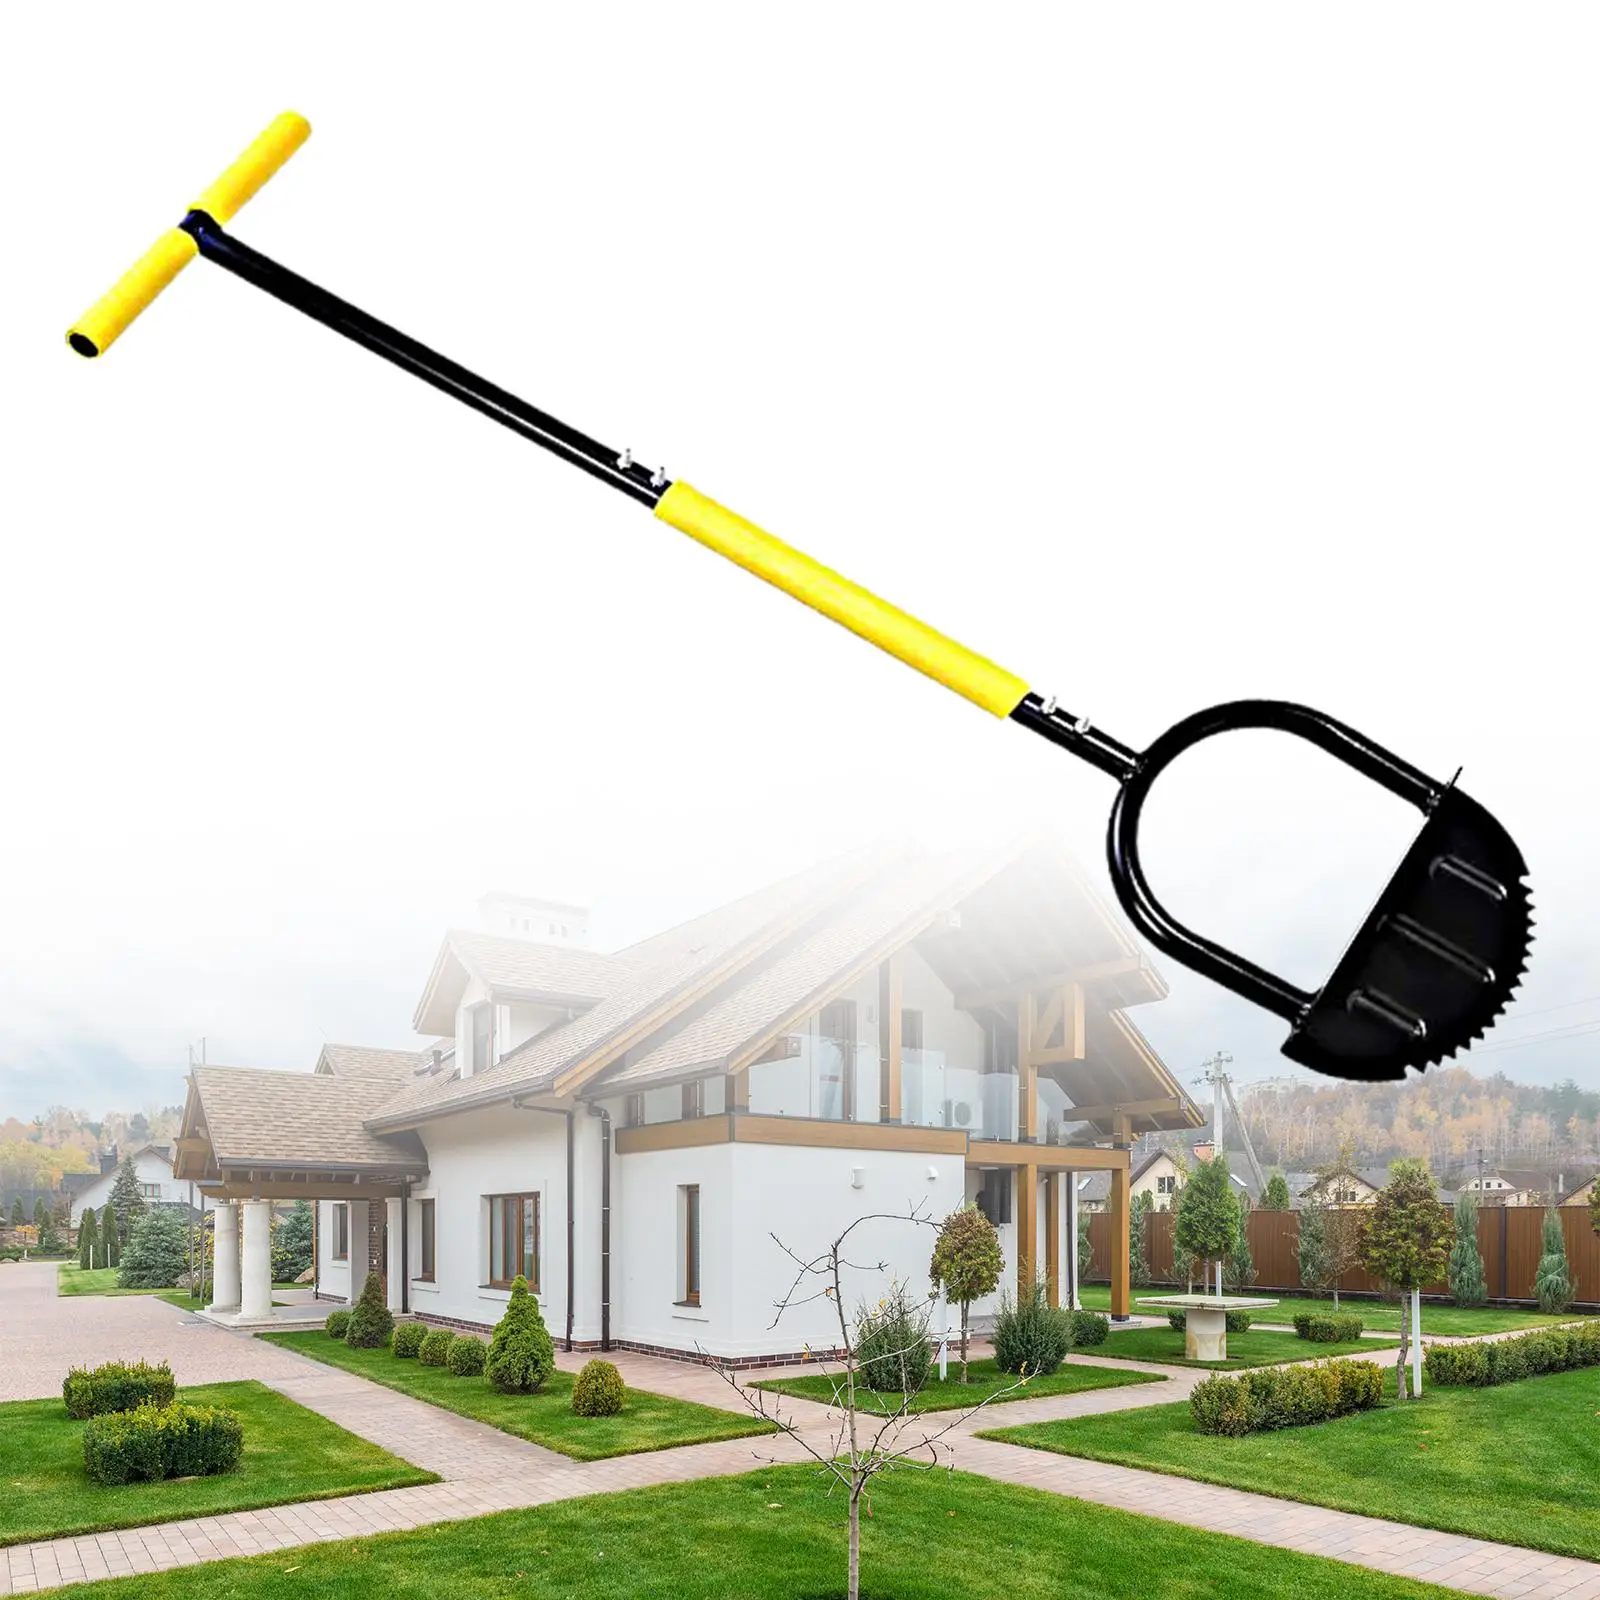 Lawn Edging Tool Ergonomic Handle Manual Edger Lawn Tool for Garden Bed Sidewalk Garden Flower Beds Cleaning Edges Landscapers